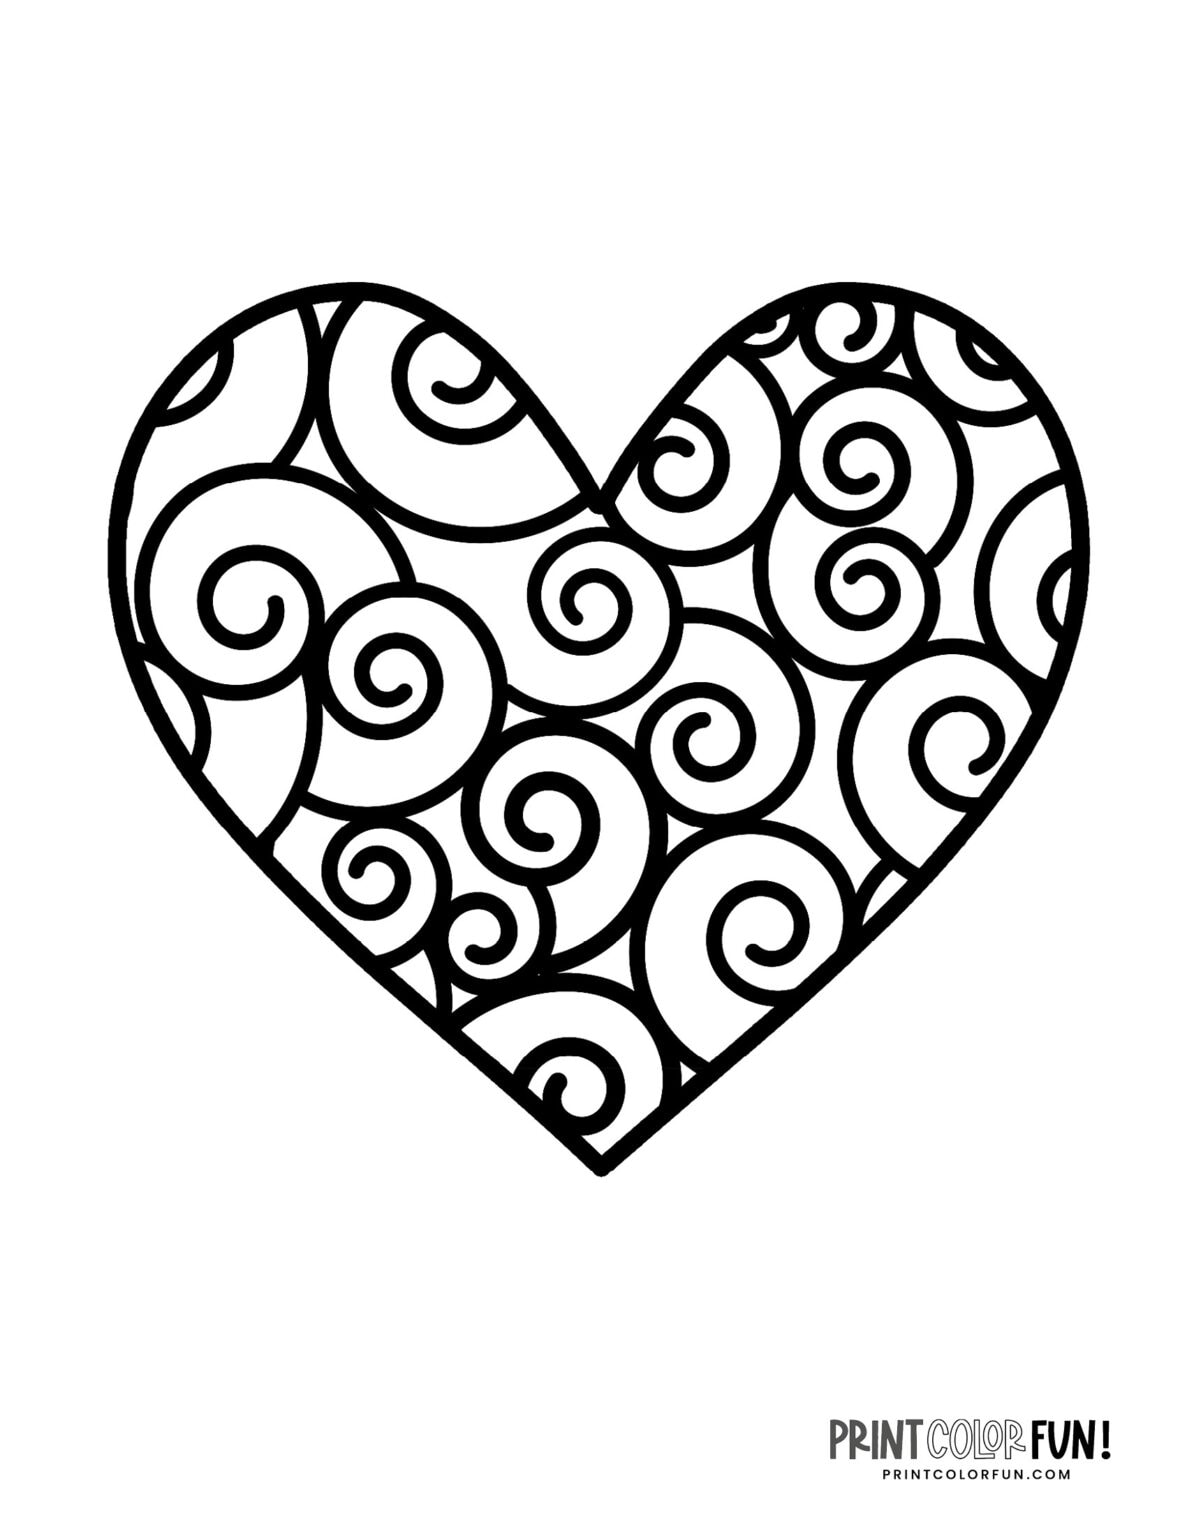 100  printable heart coloring pages: A huge collection of hearts for